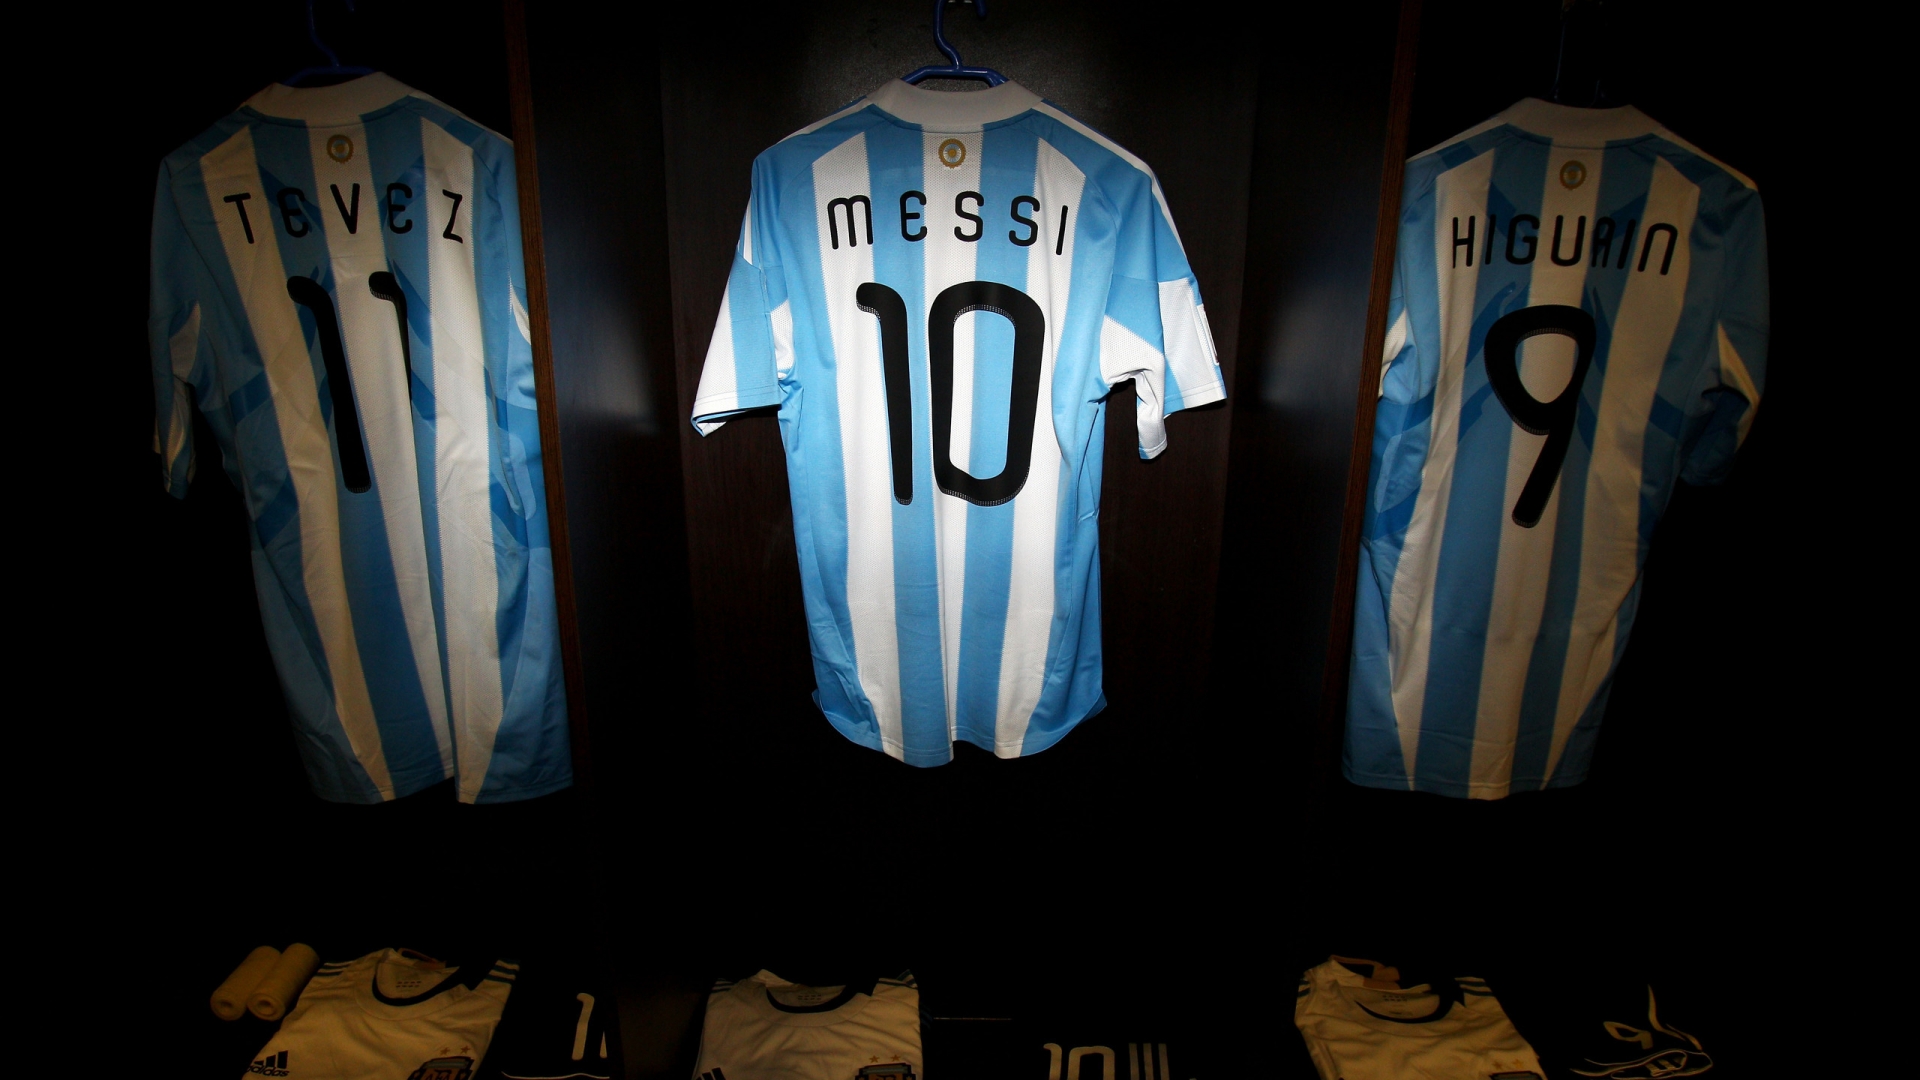 Tshirt of Messi, Tevez and Higuain for 1920 x 1080 HDTV 1080p resolution